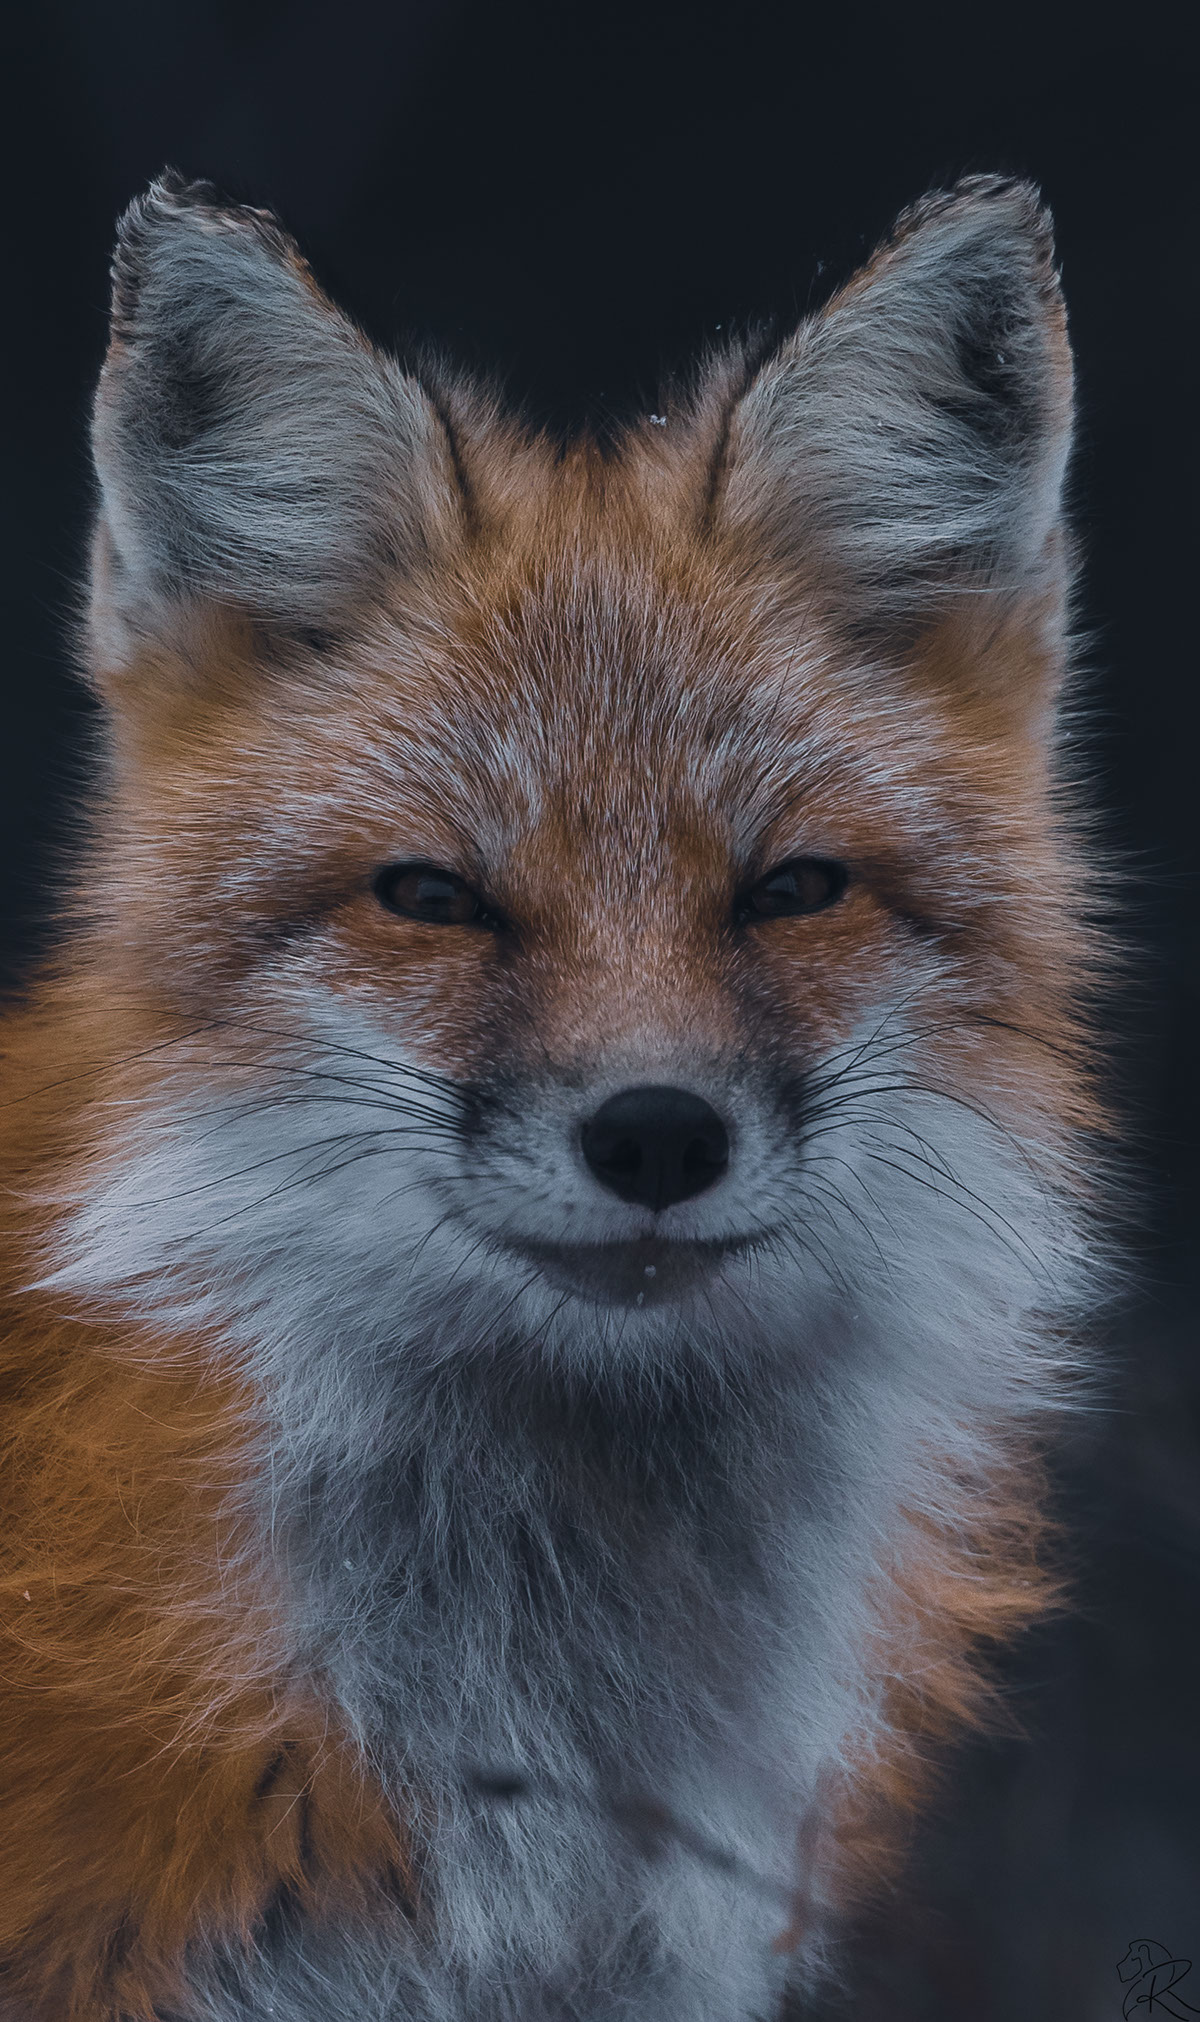 The Hungry Fox rendition image